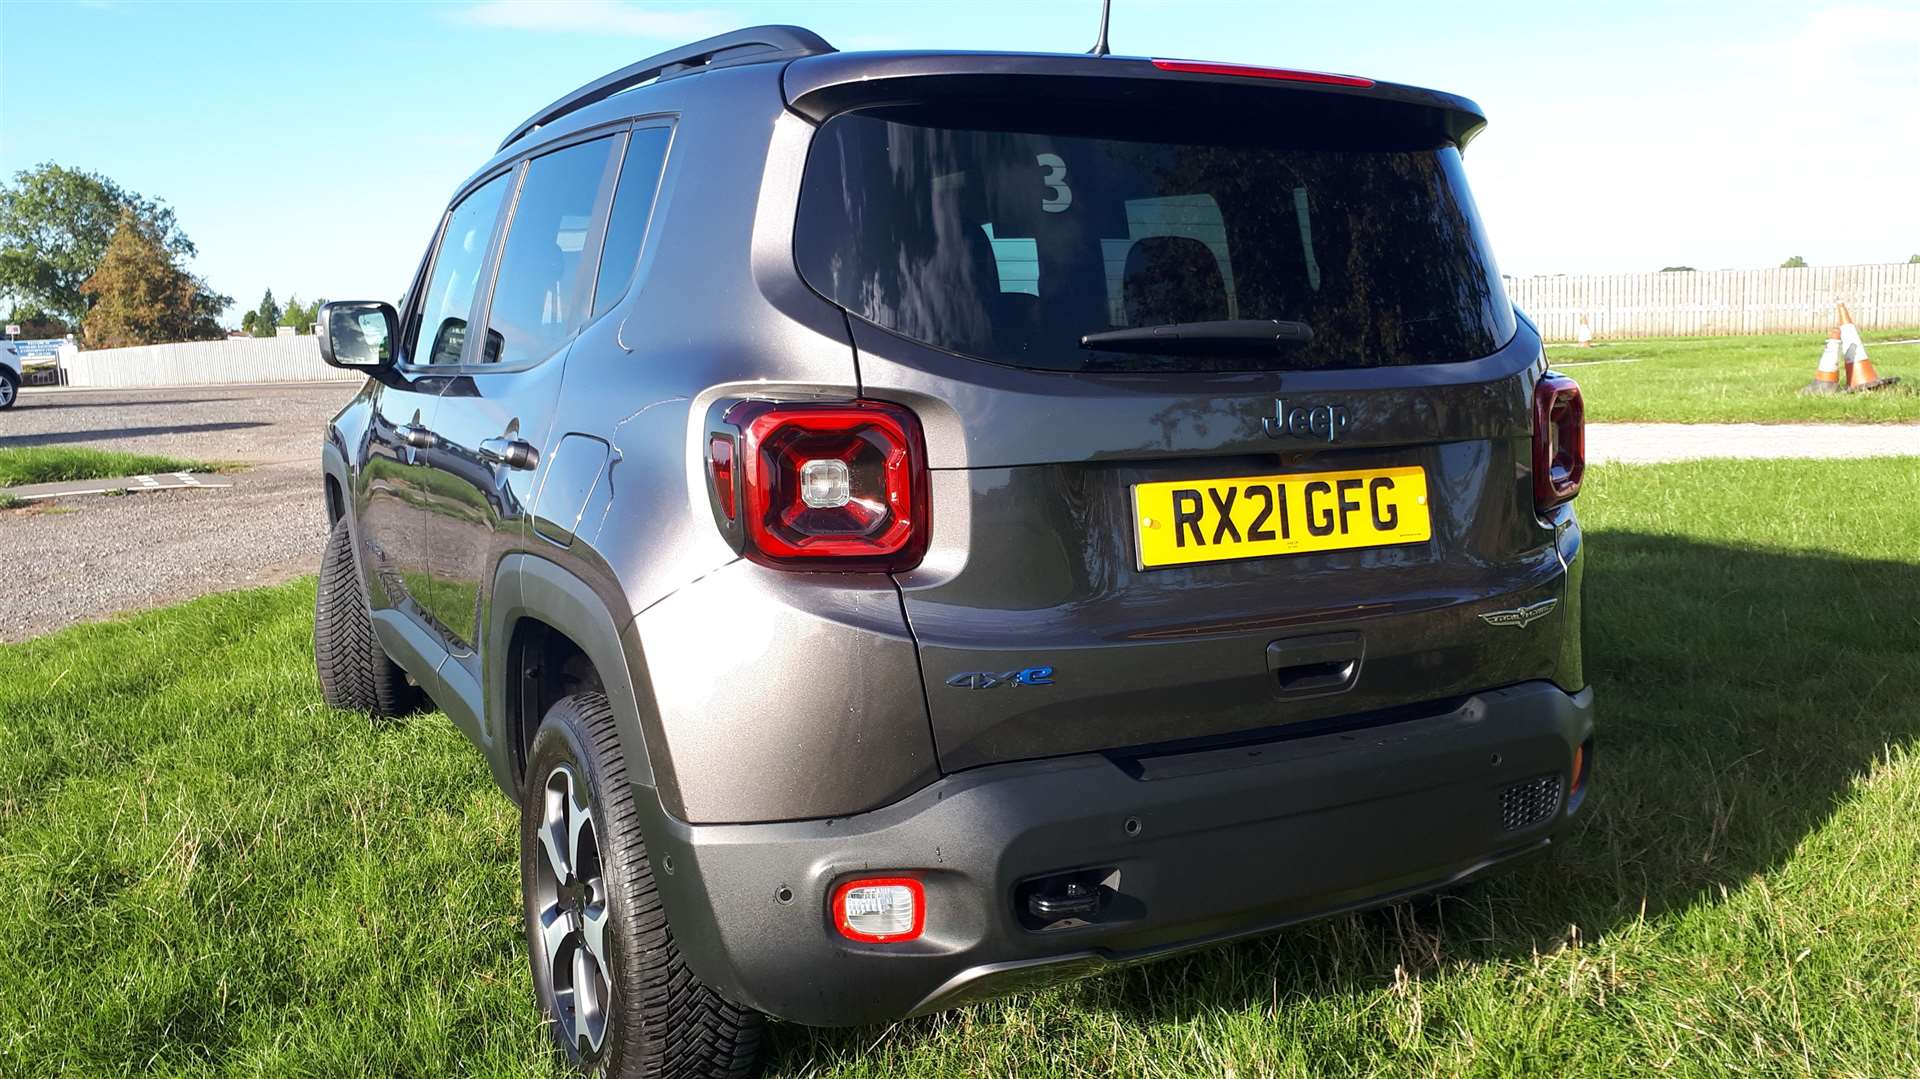 The Jeep Renegade.